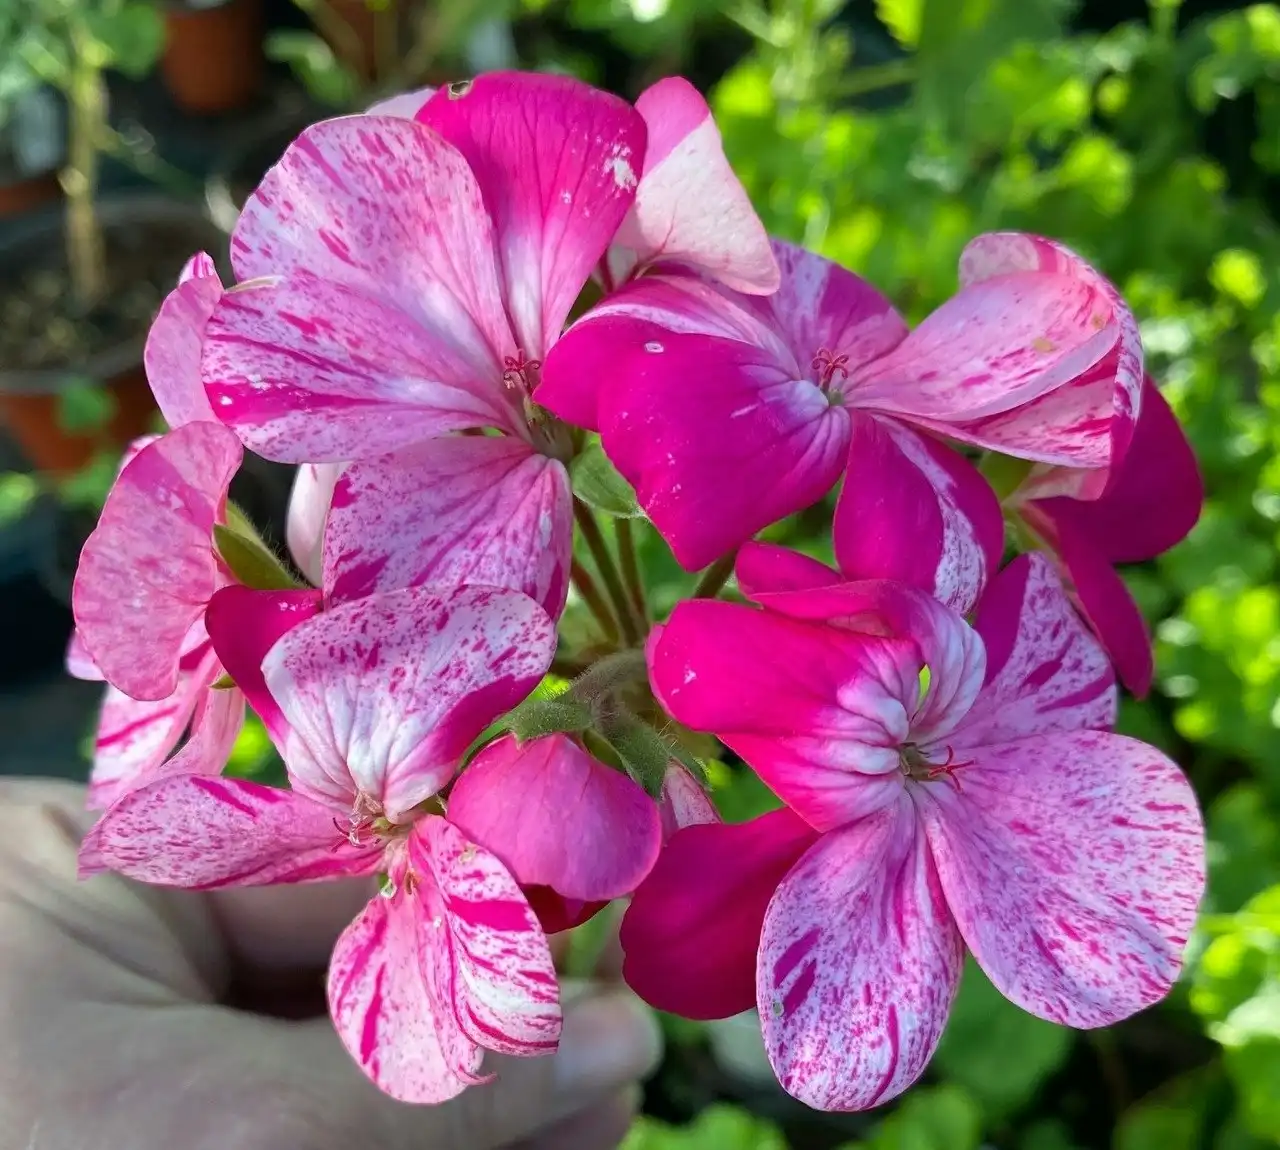 Geranium Garden Jewels cuttings or potted plant